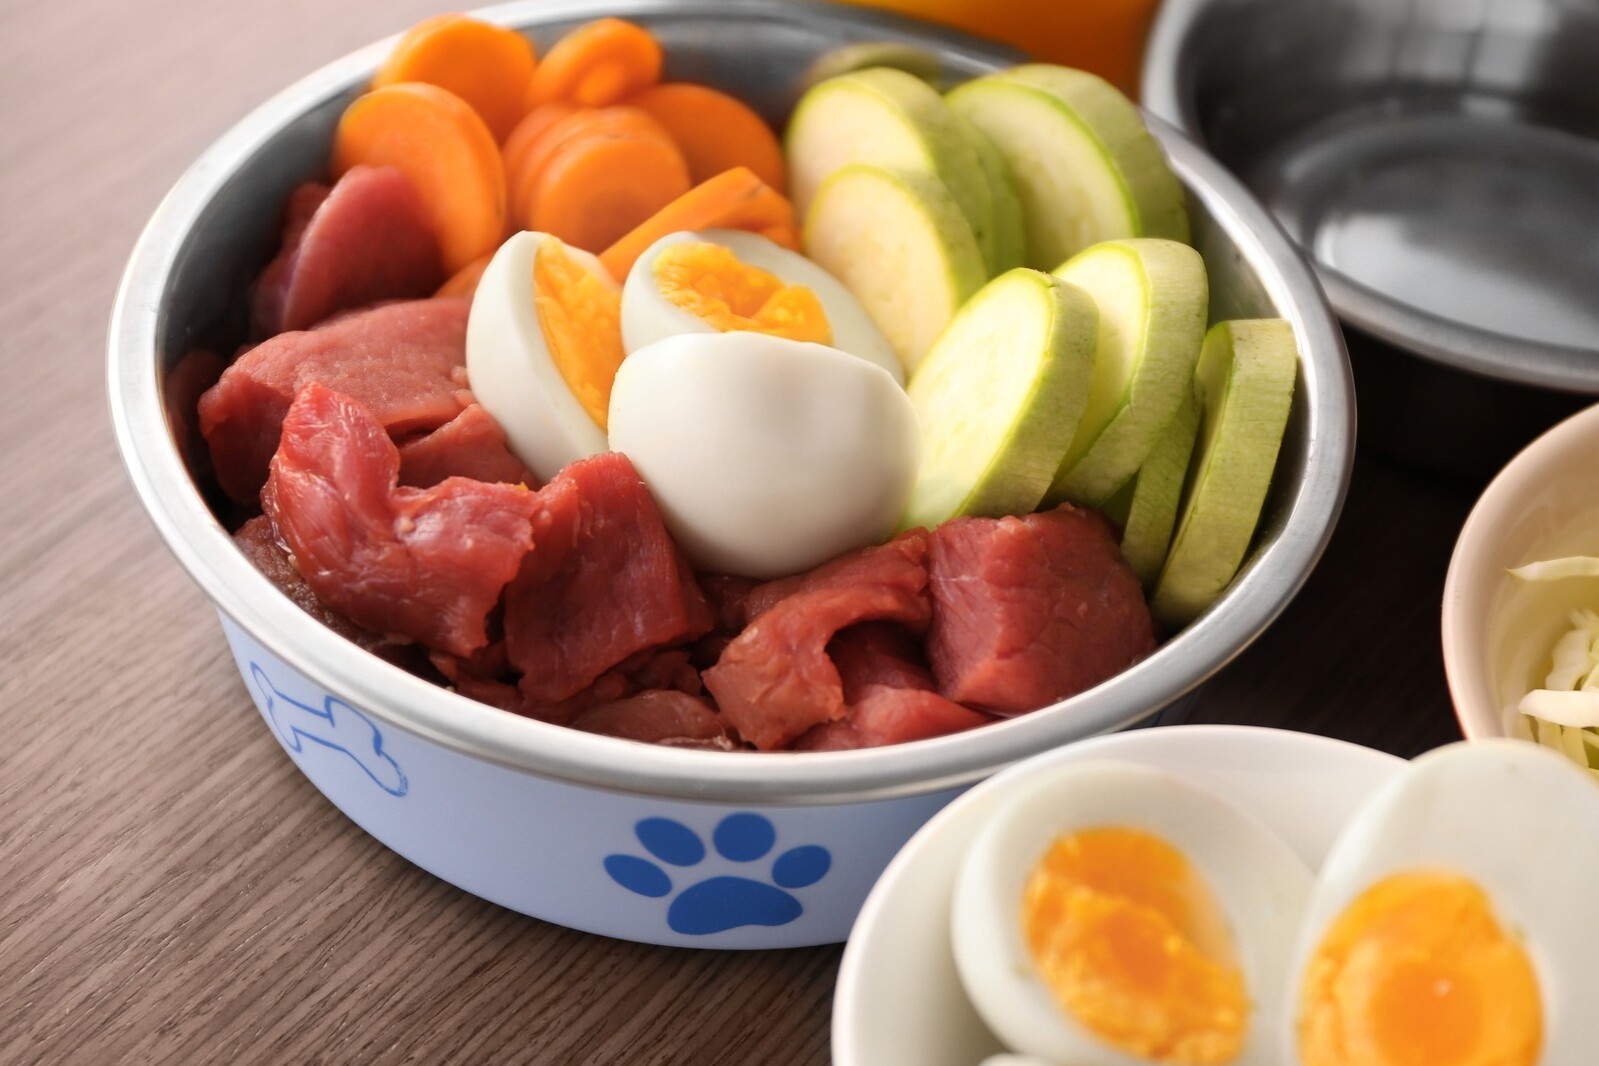 Vegetables, Eggs and Raw Meat in a White Dog Bowl with Paw Prints